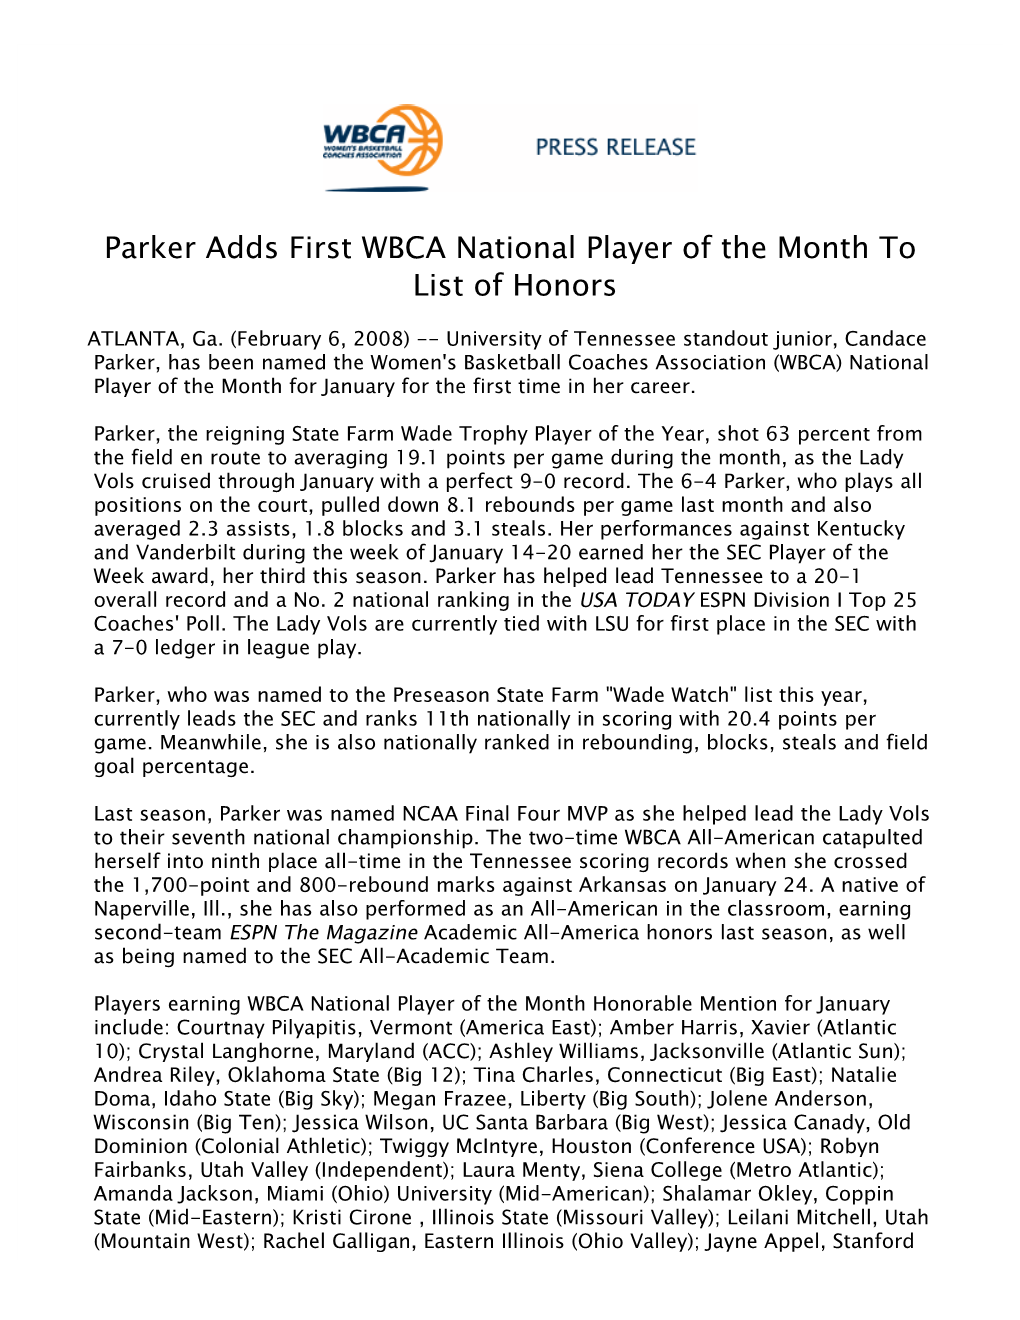 Parker Adds First WBCA National Player of the Month to List of Honors